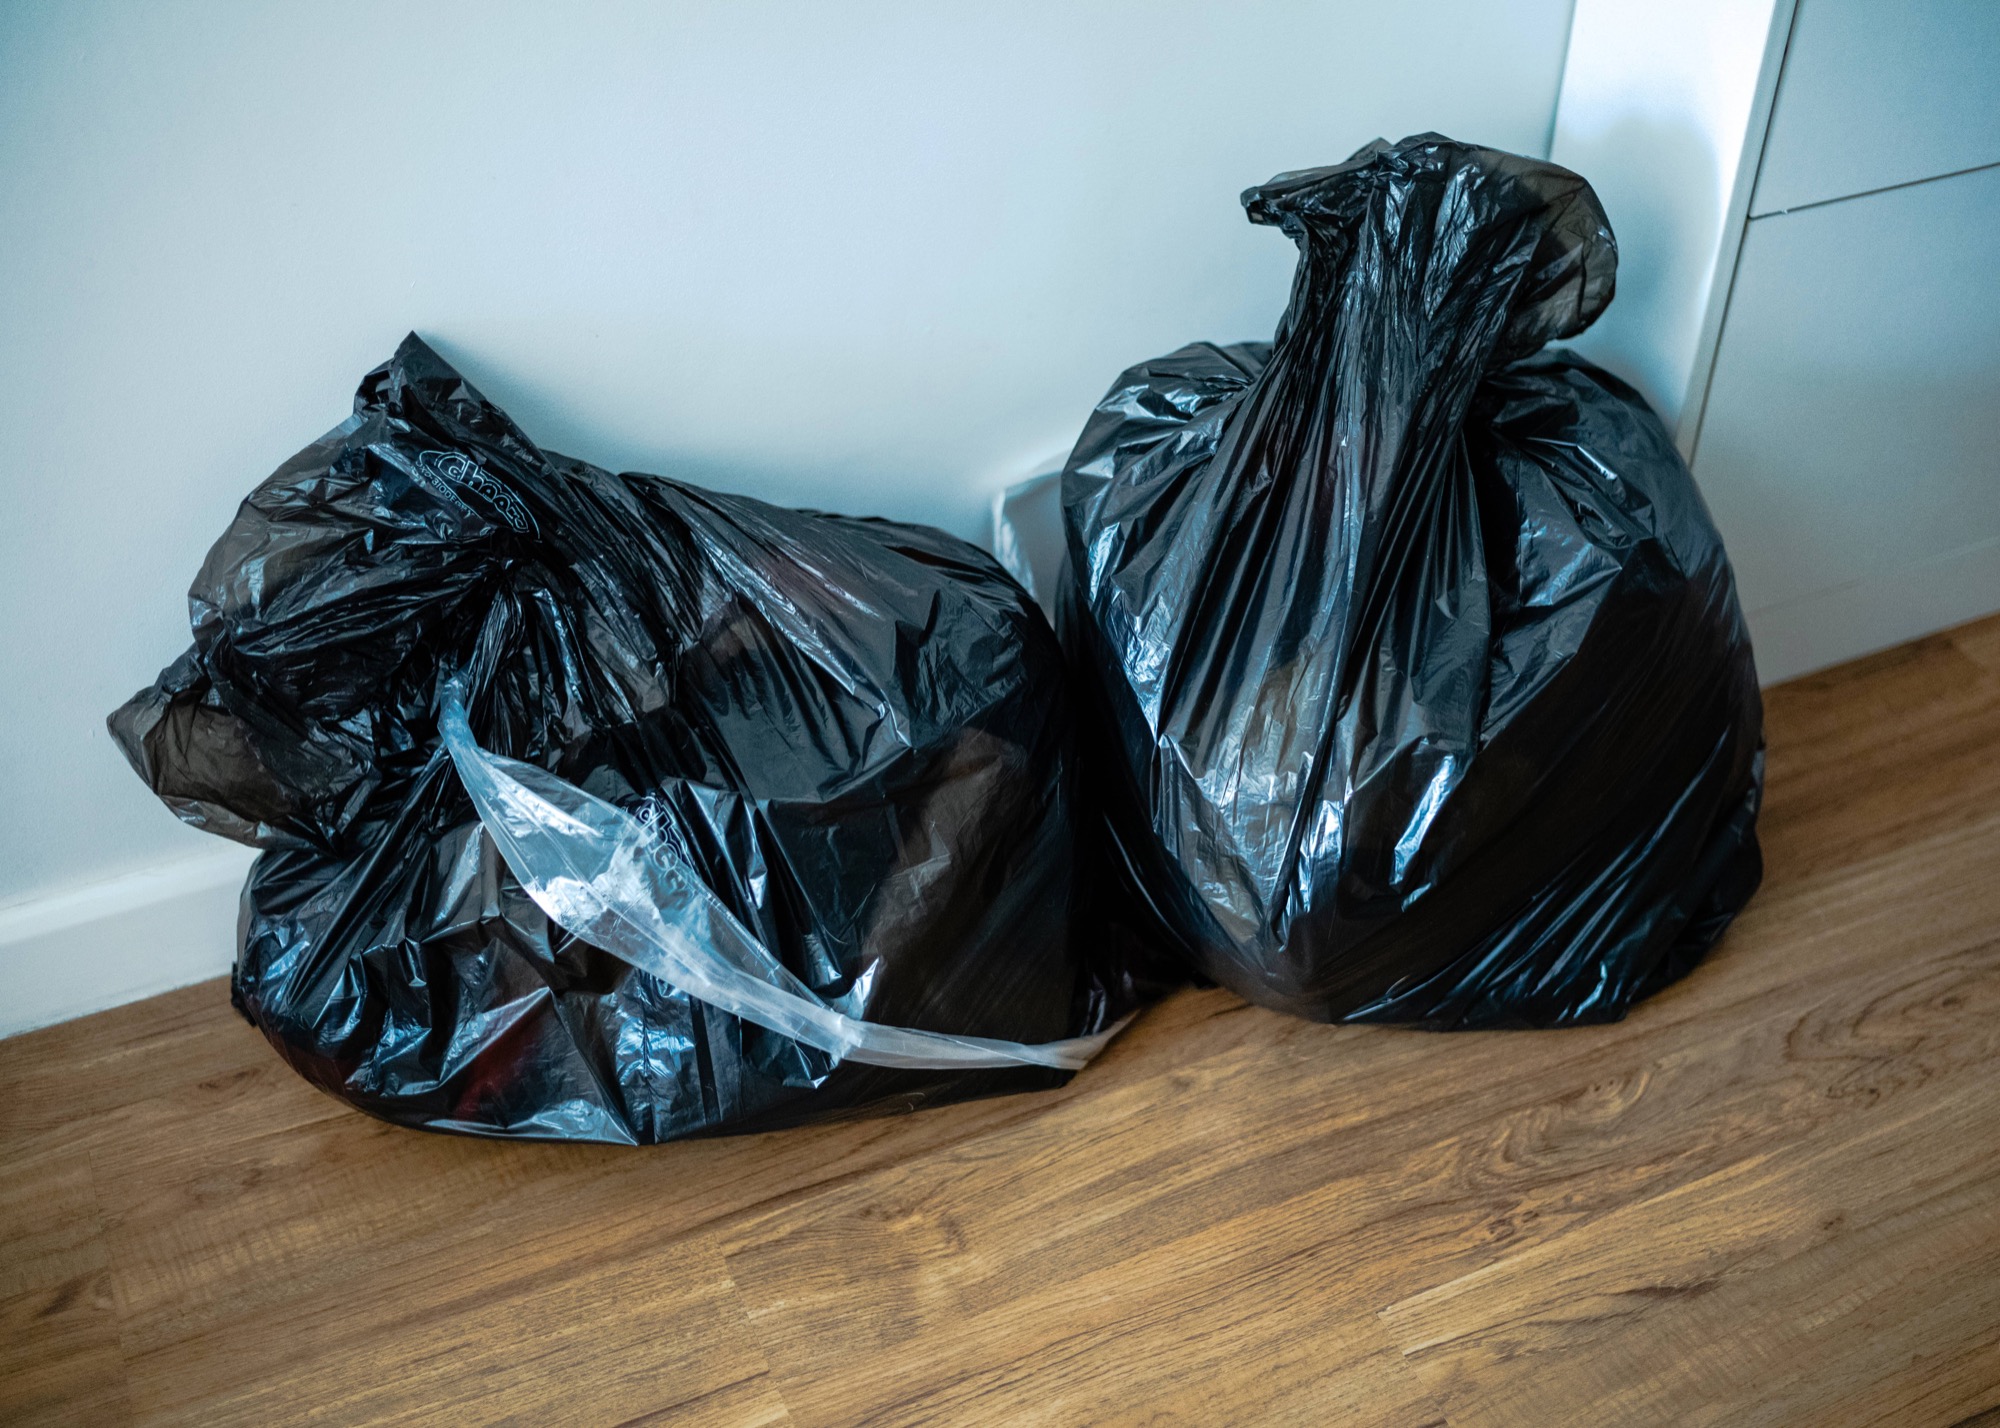 Two black trashbags filled with lothes for donation